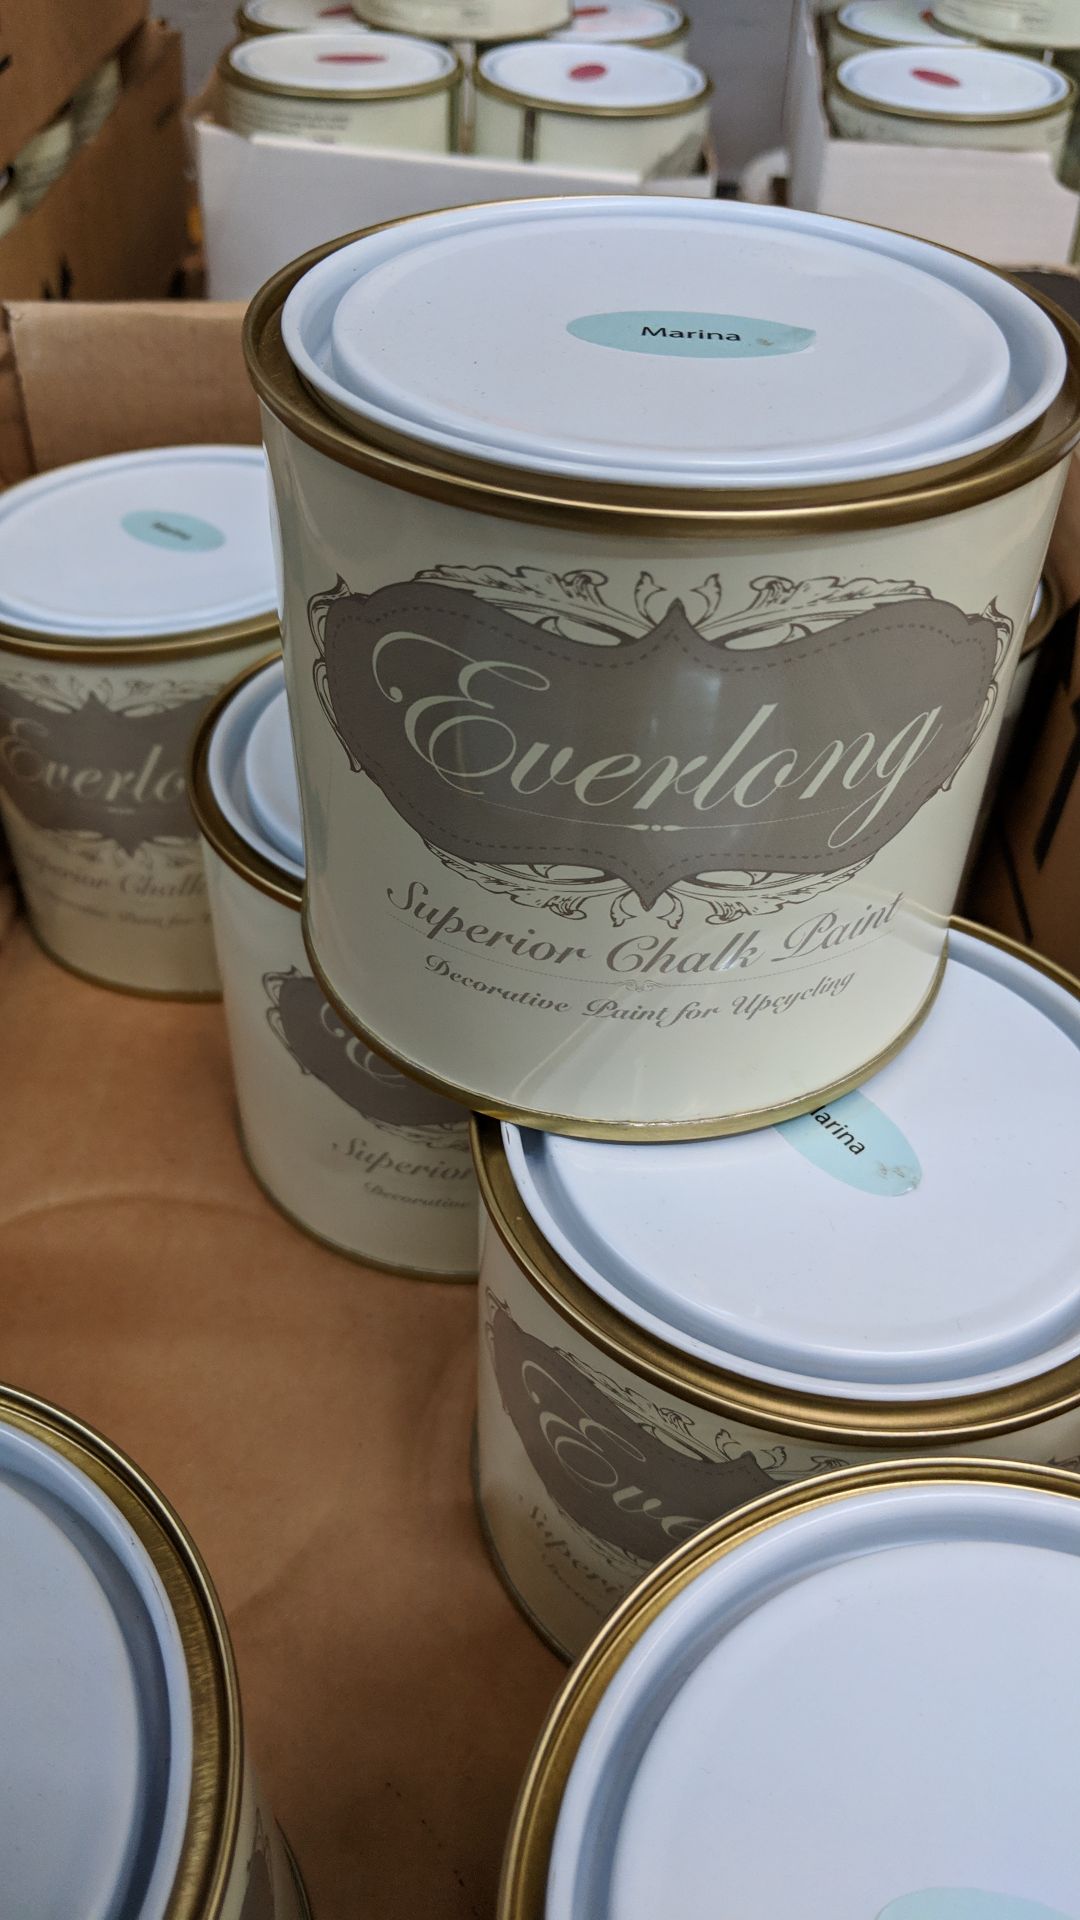 42 off 500ml tins of Everlong branded superior chalk paint - colour Marina This lot is one of a - Image 2 of 2